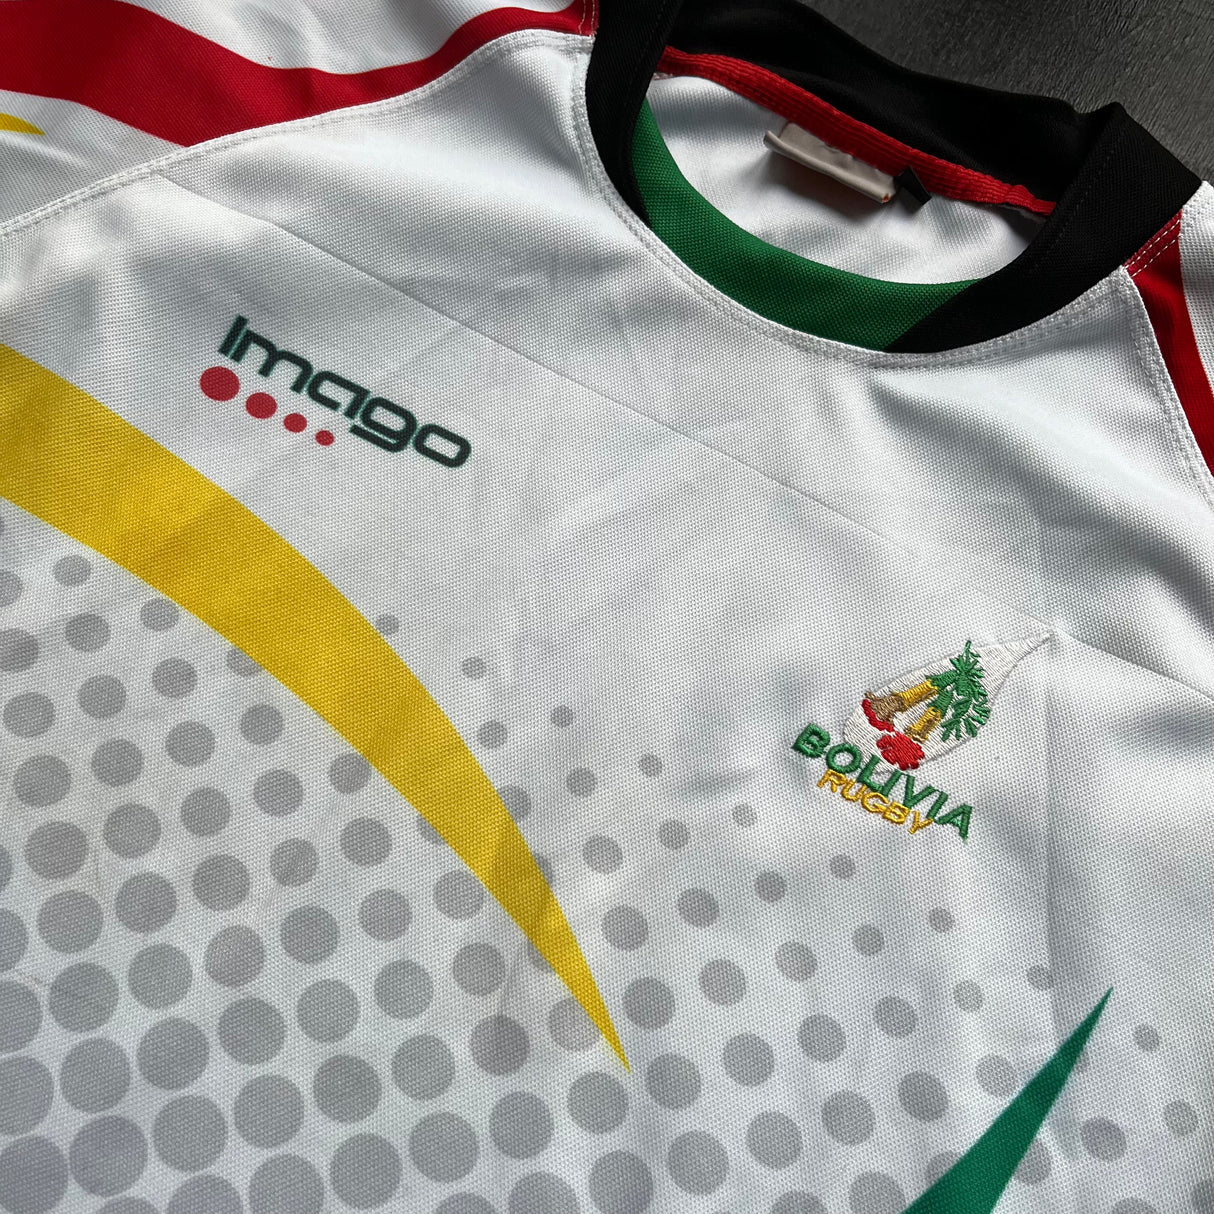 Bolivia National Rugby Team Jersey 2016 Medium Underdog Rugby - The Tier 2 Rugby Shop 